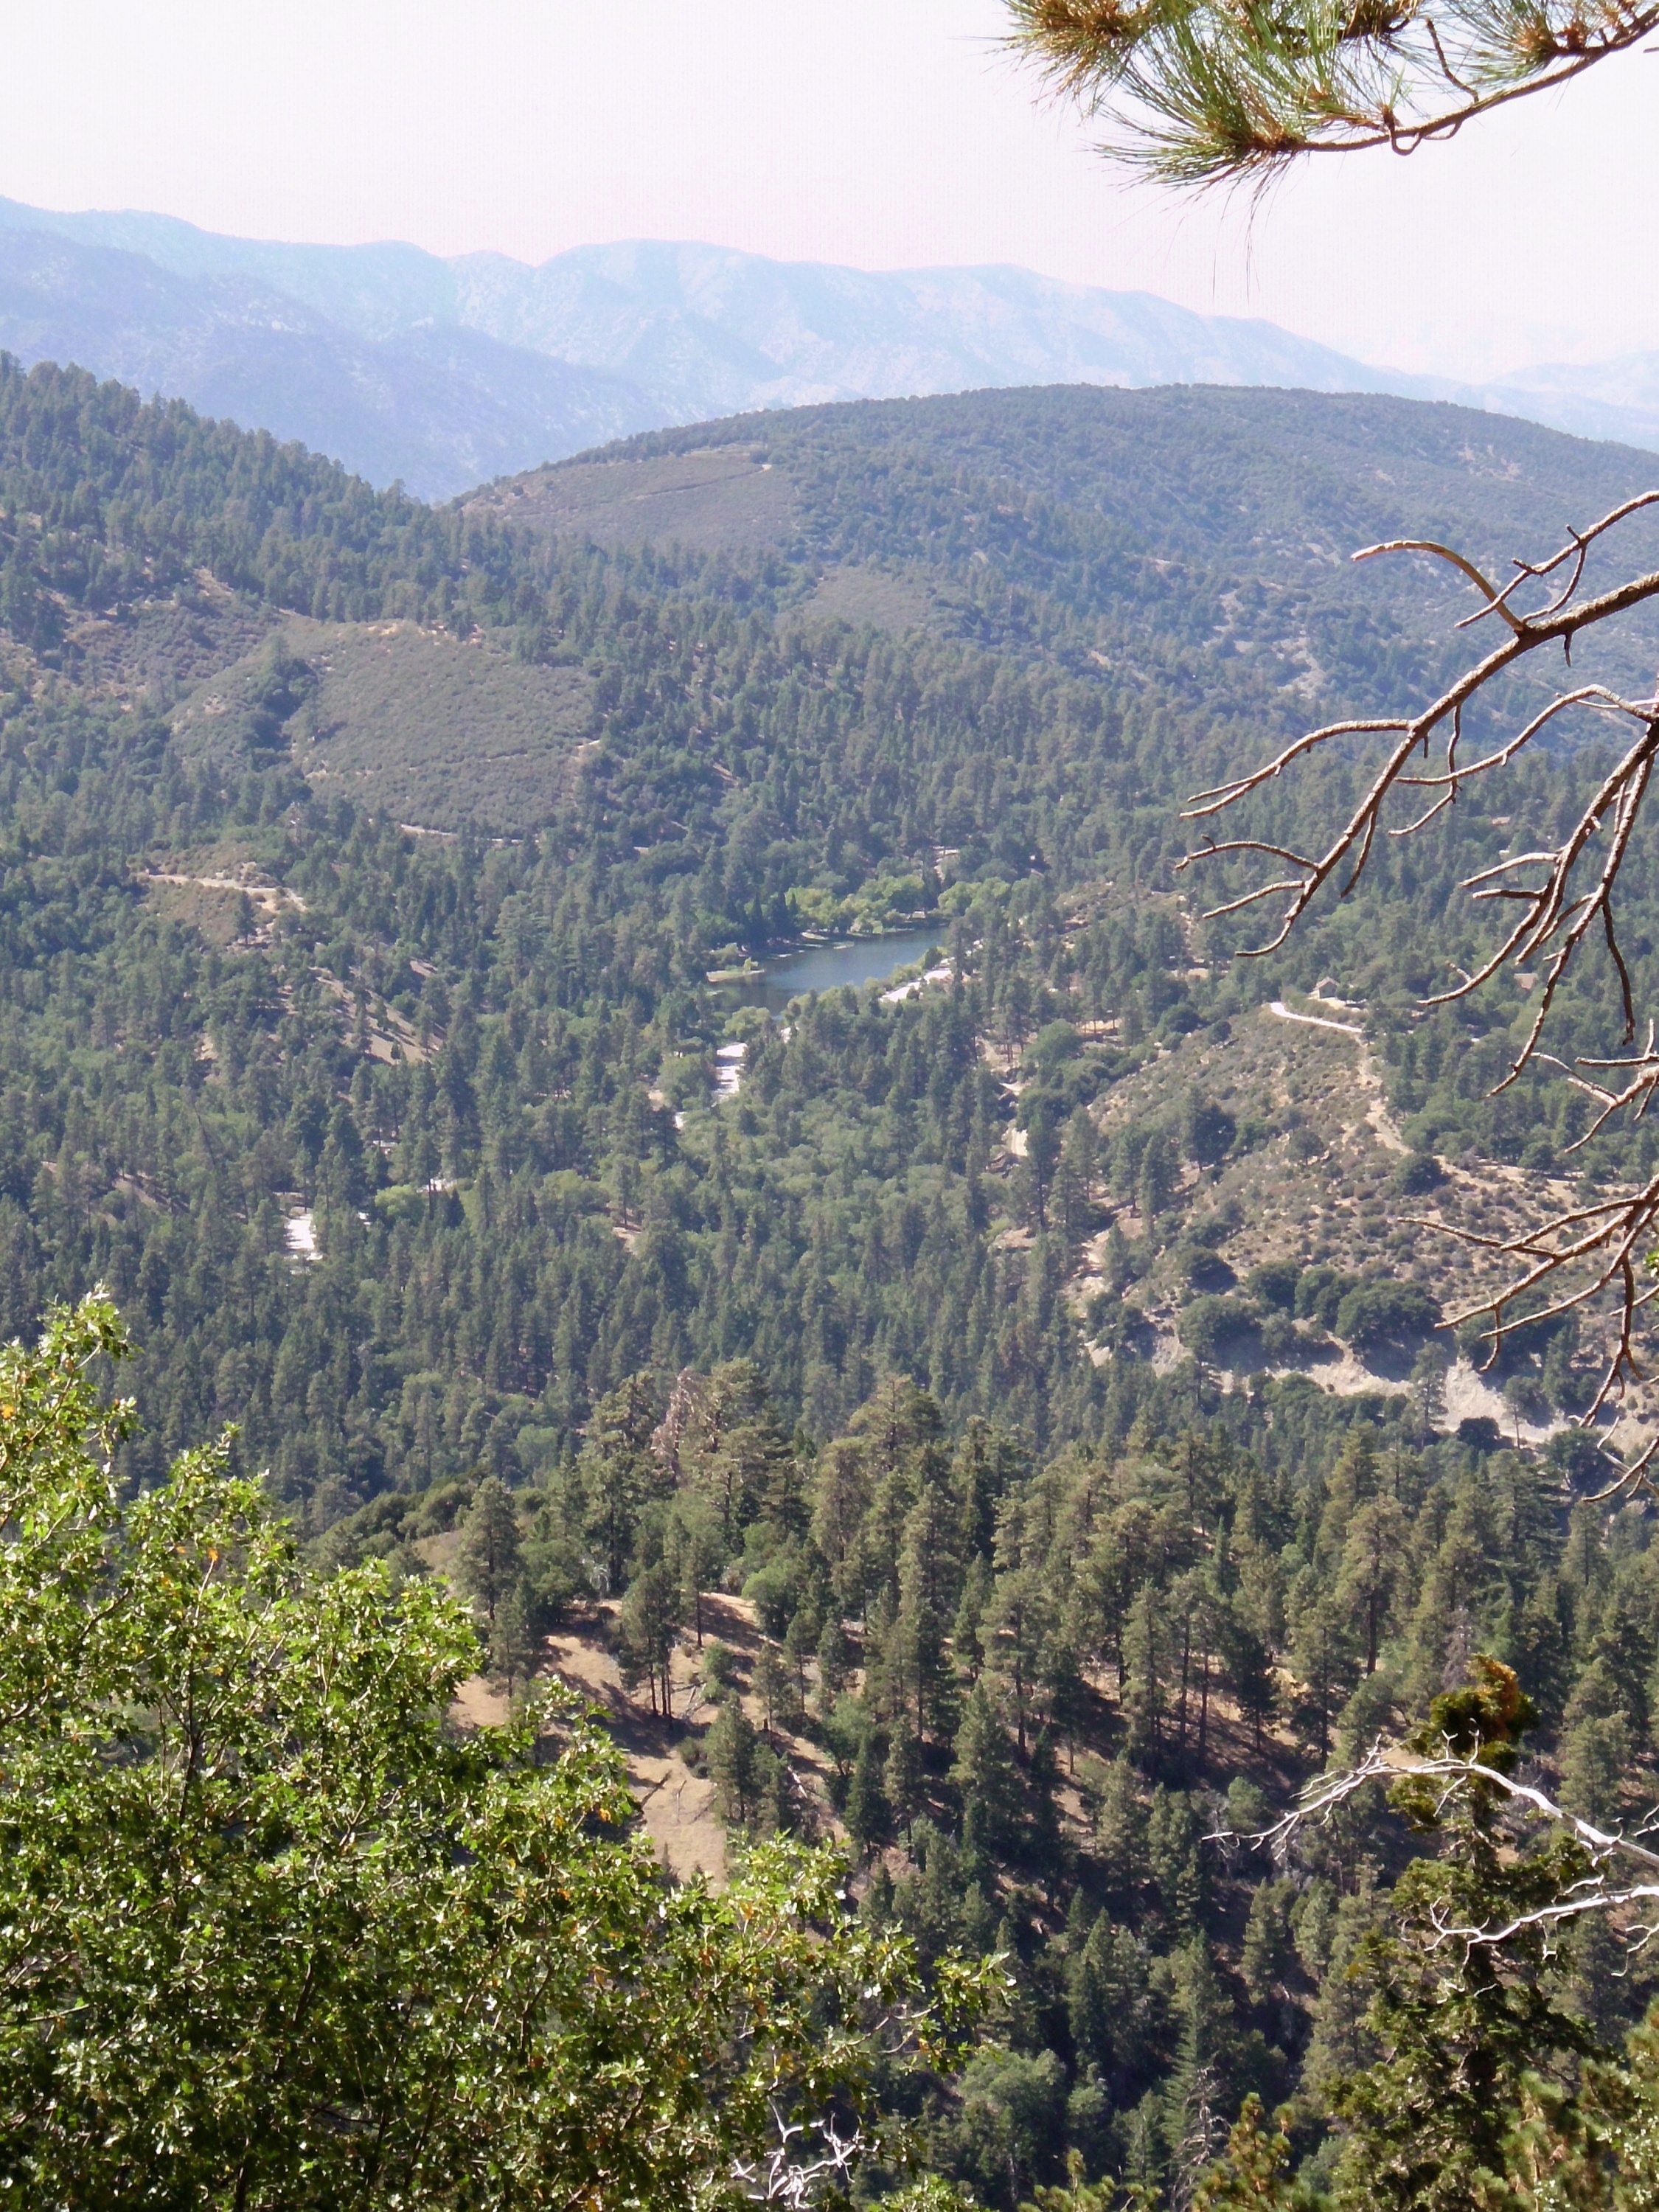 View from Angeles Scenic Byway